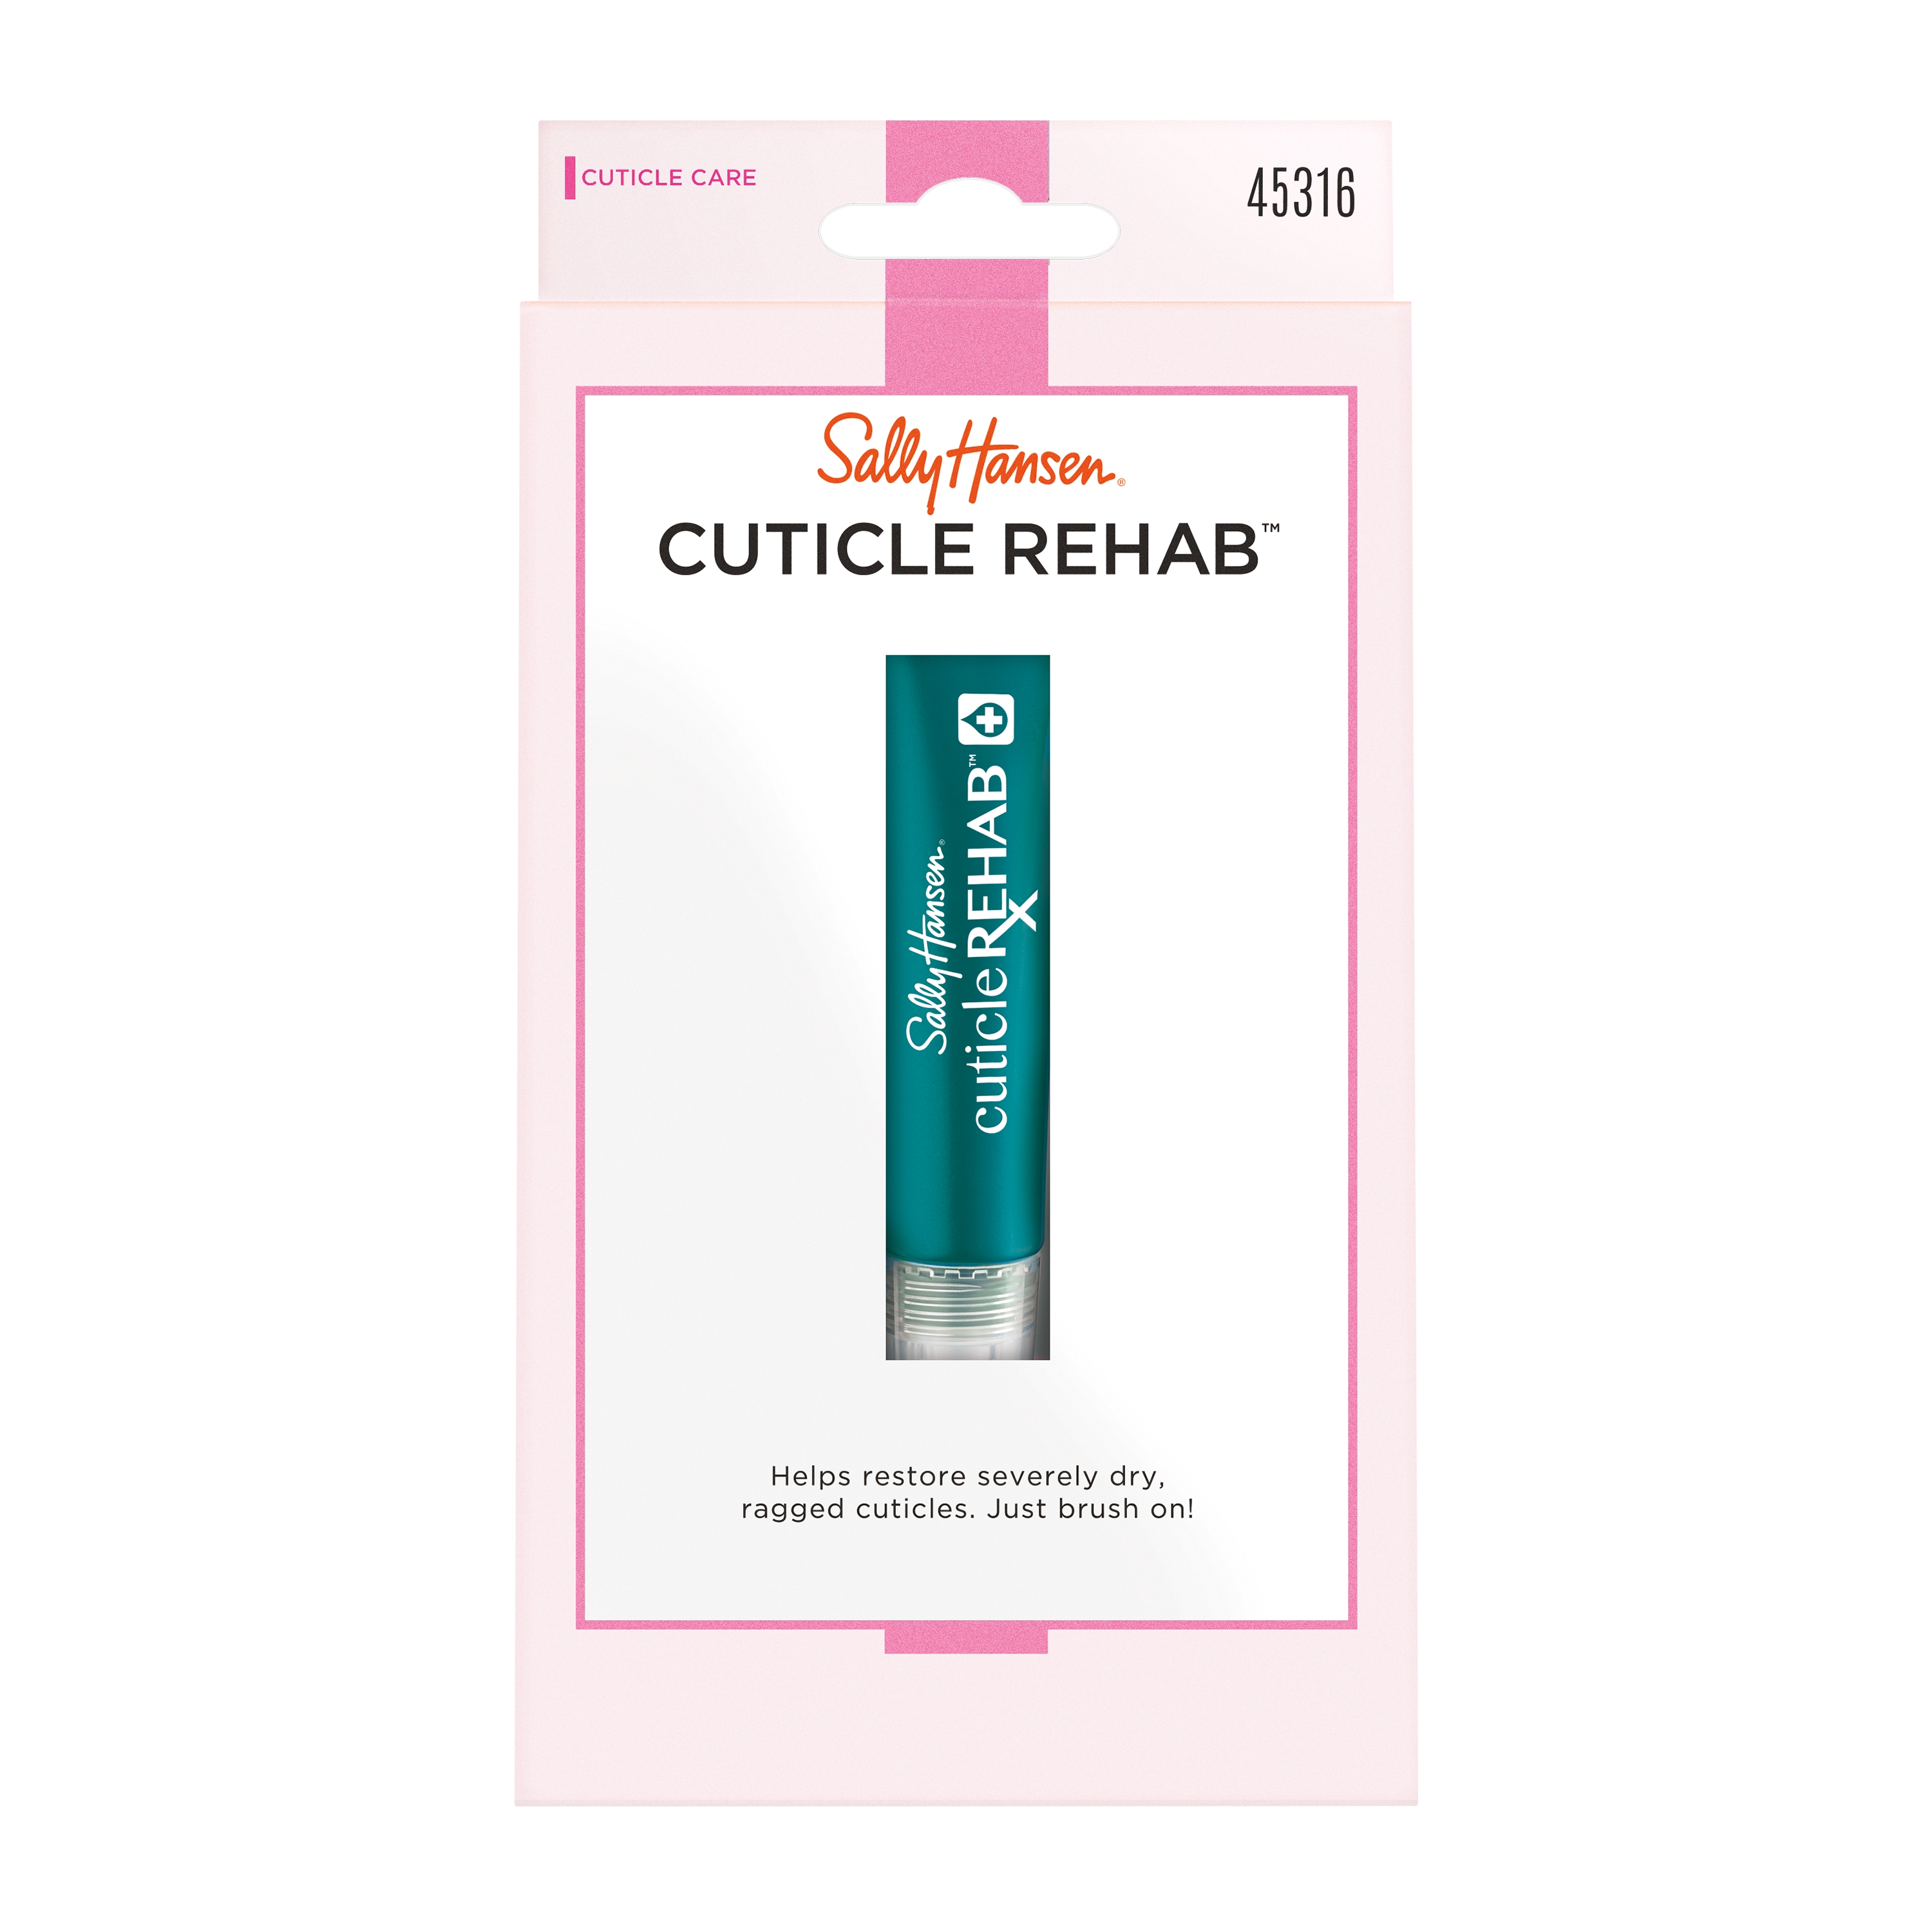 Sally Hansen Treatment Cuticle Rehab, 0.29 fl oz, Calms, Soothes and Nourishes - image 3 of 5